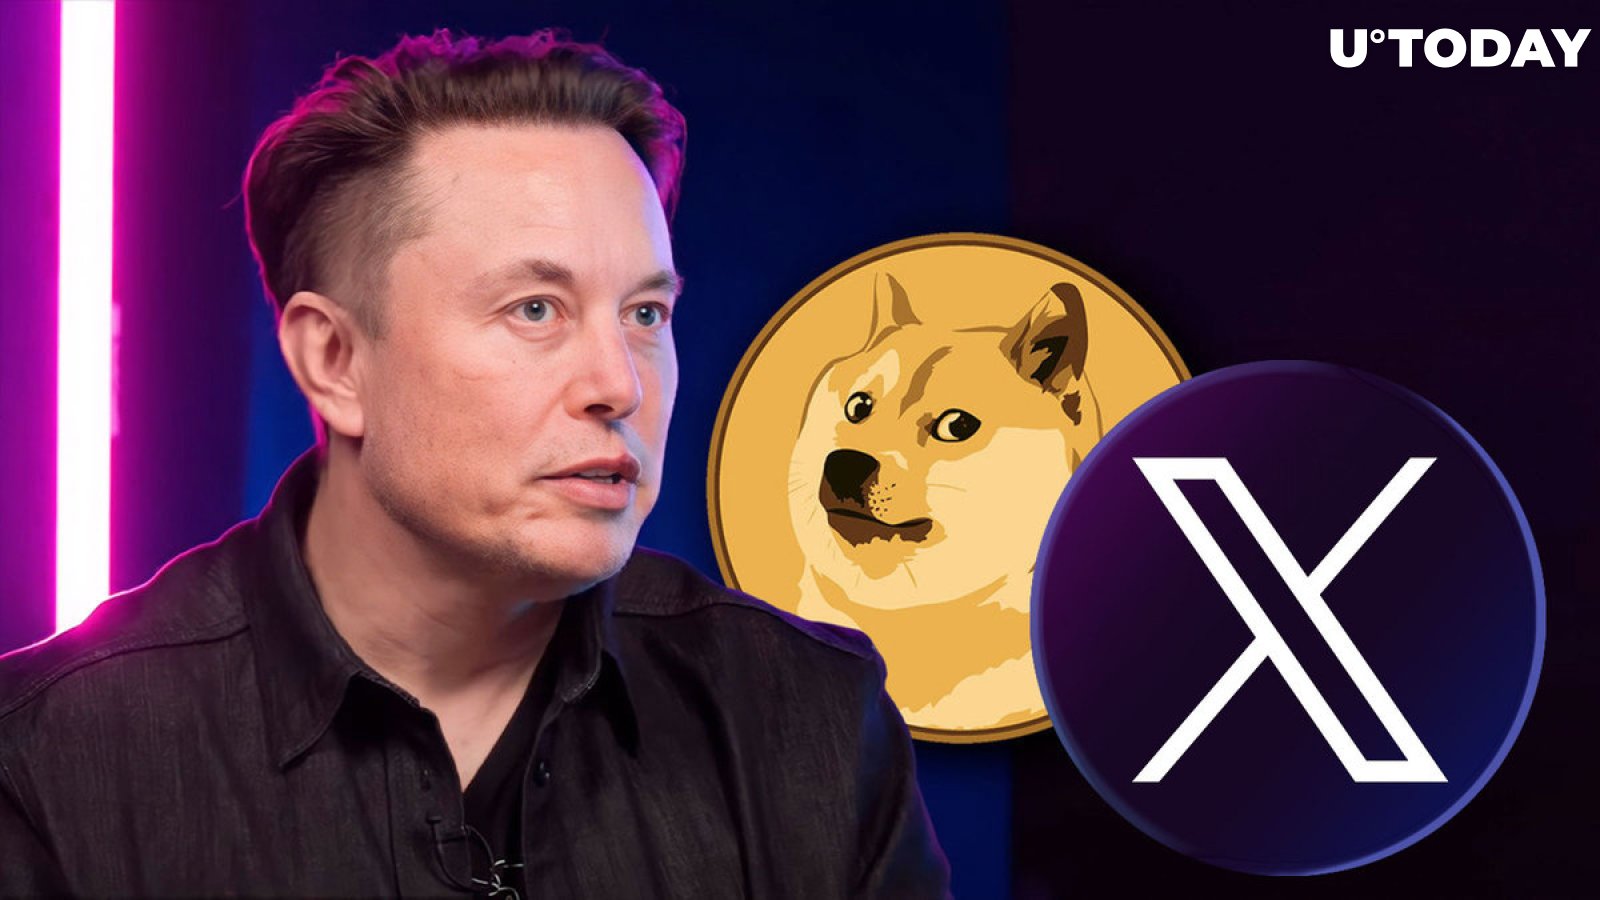 Dogecoin (DOGE) Shines as Elon Musk’s X Prepares to Launch P2P Payments